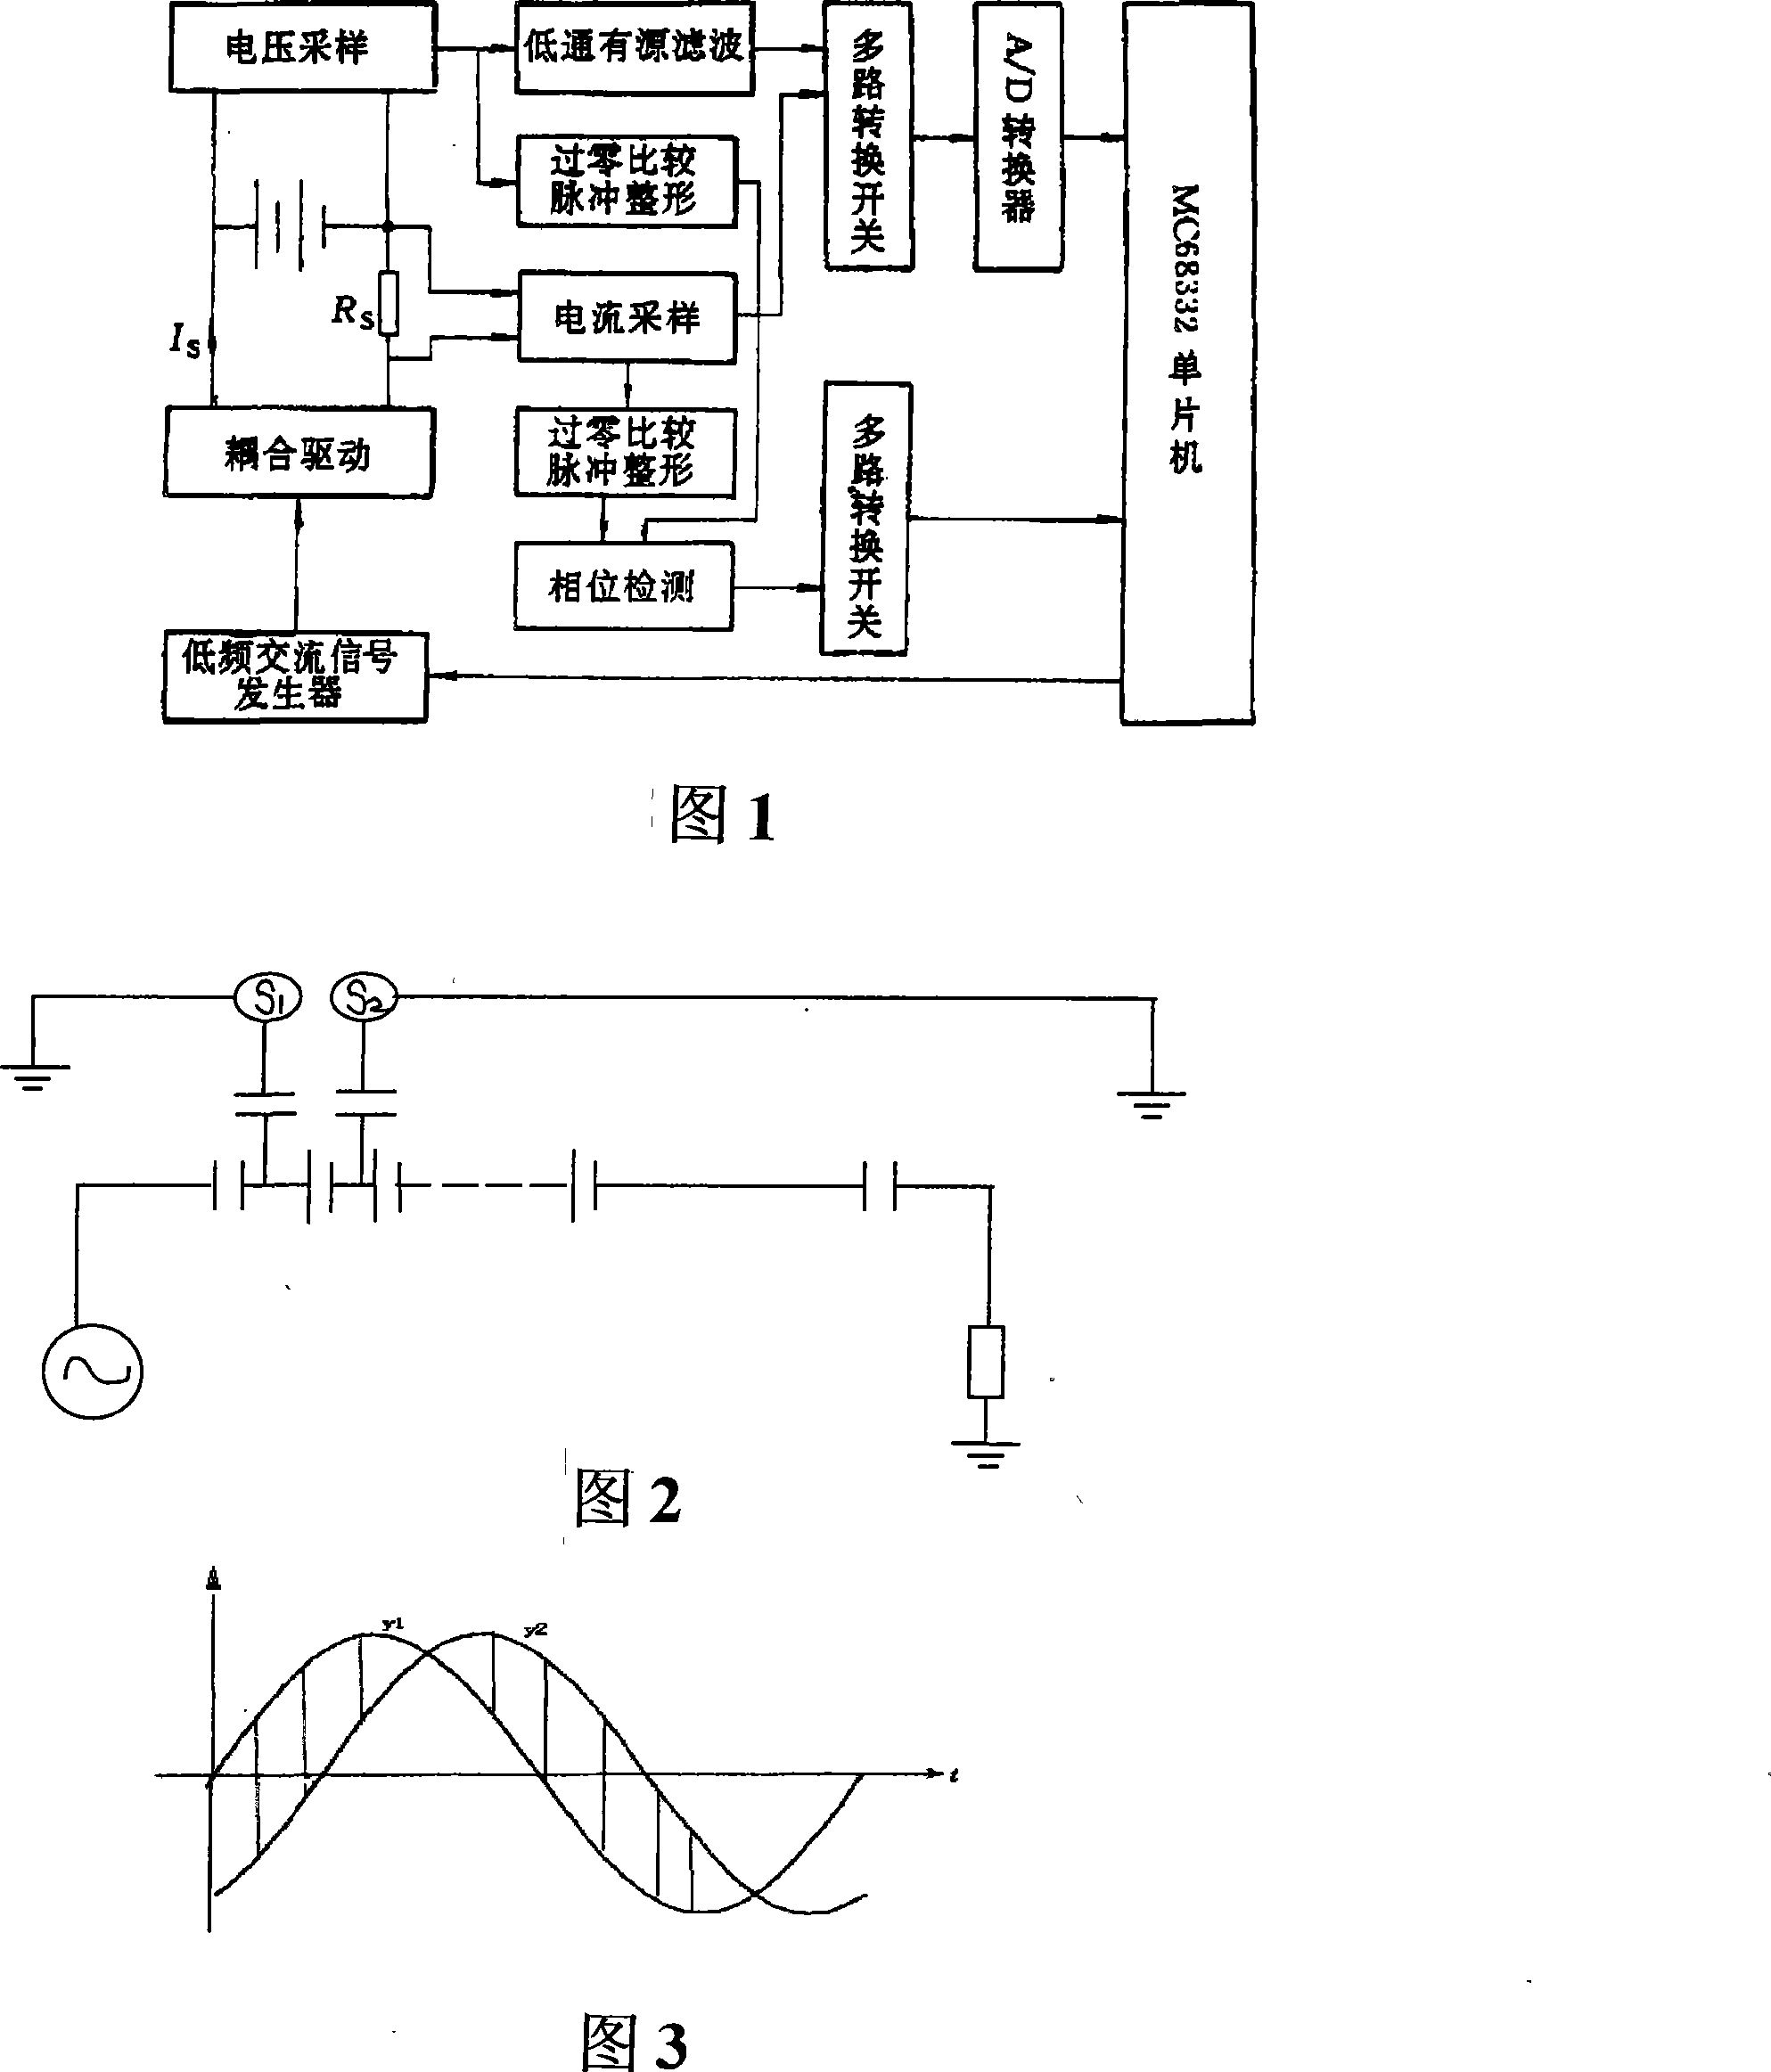 Accumulator cell real time on-line nondestructive accurate measurement method